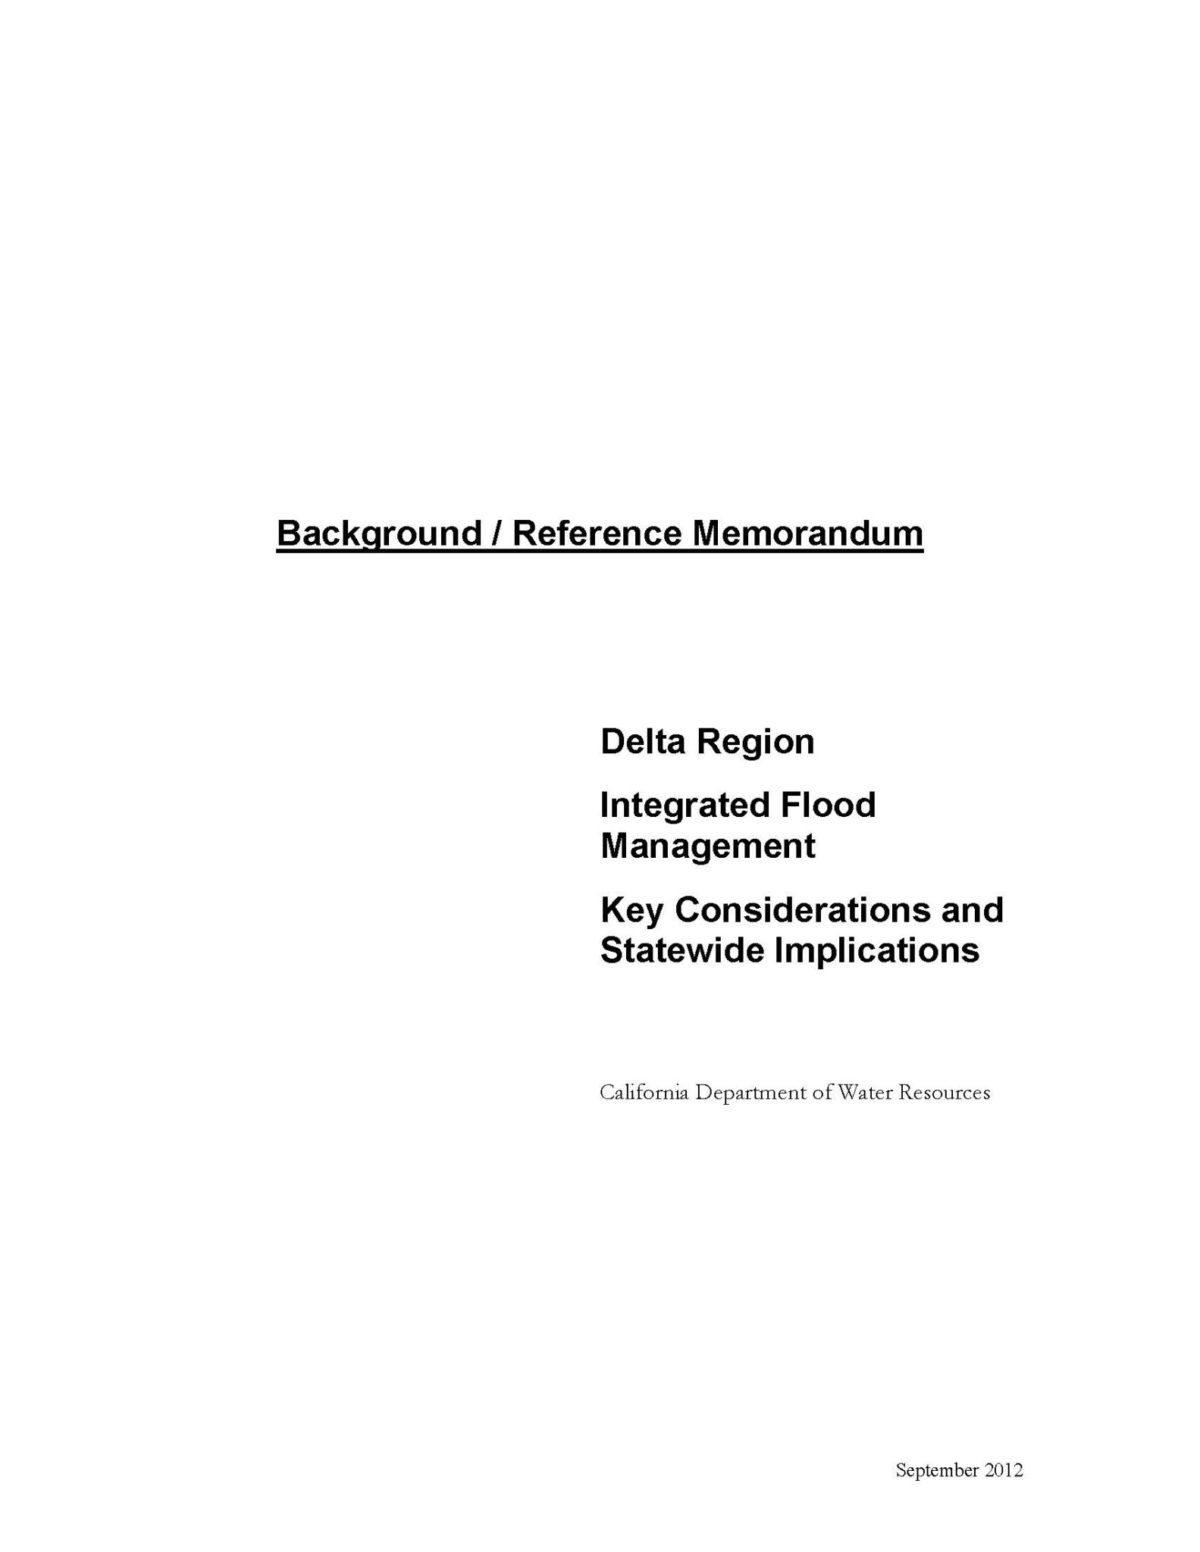 Delta Region Integrated Flood Management: Key Considerations and Statewide Implications